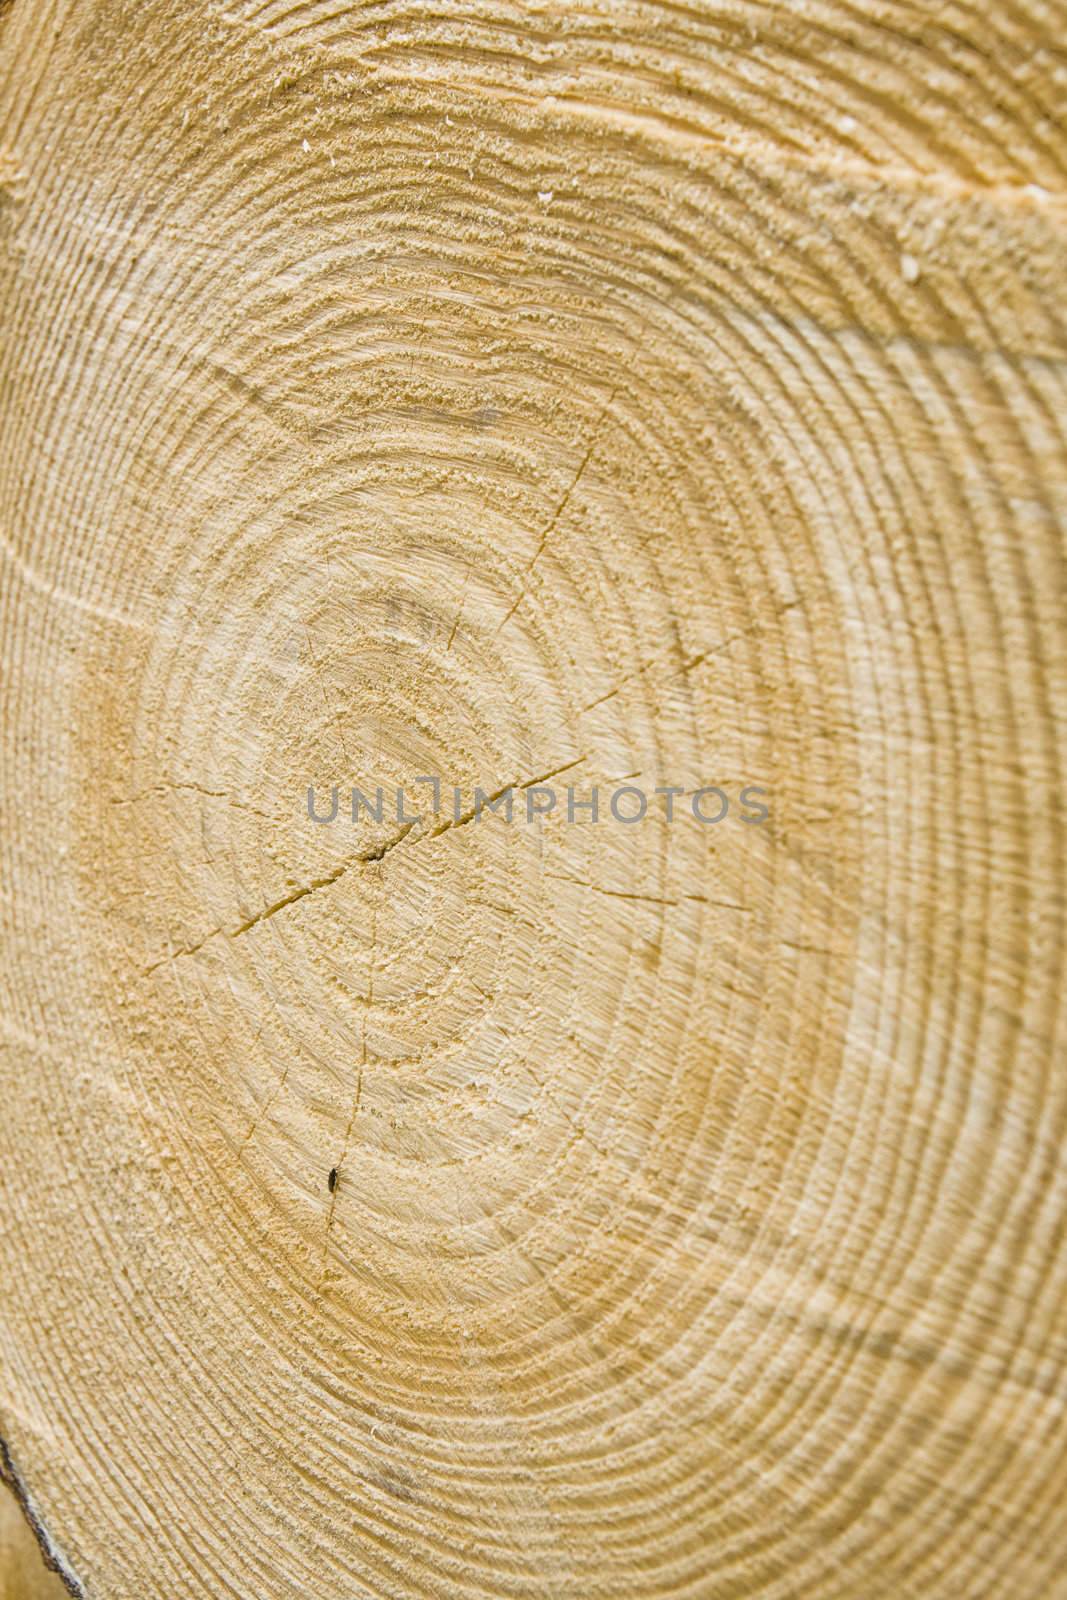 Close-up view of golden timber tree rings, suitable as background